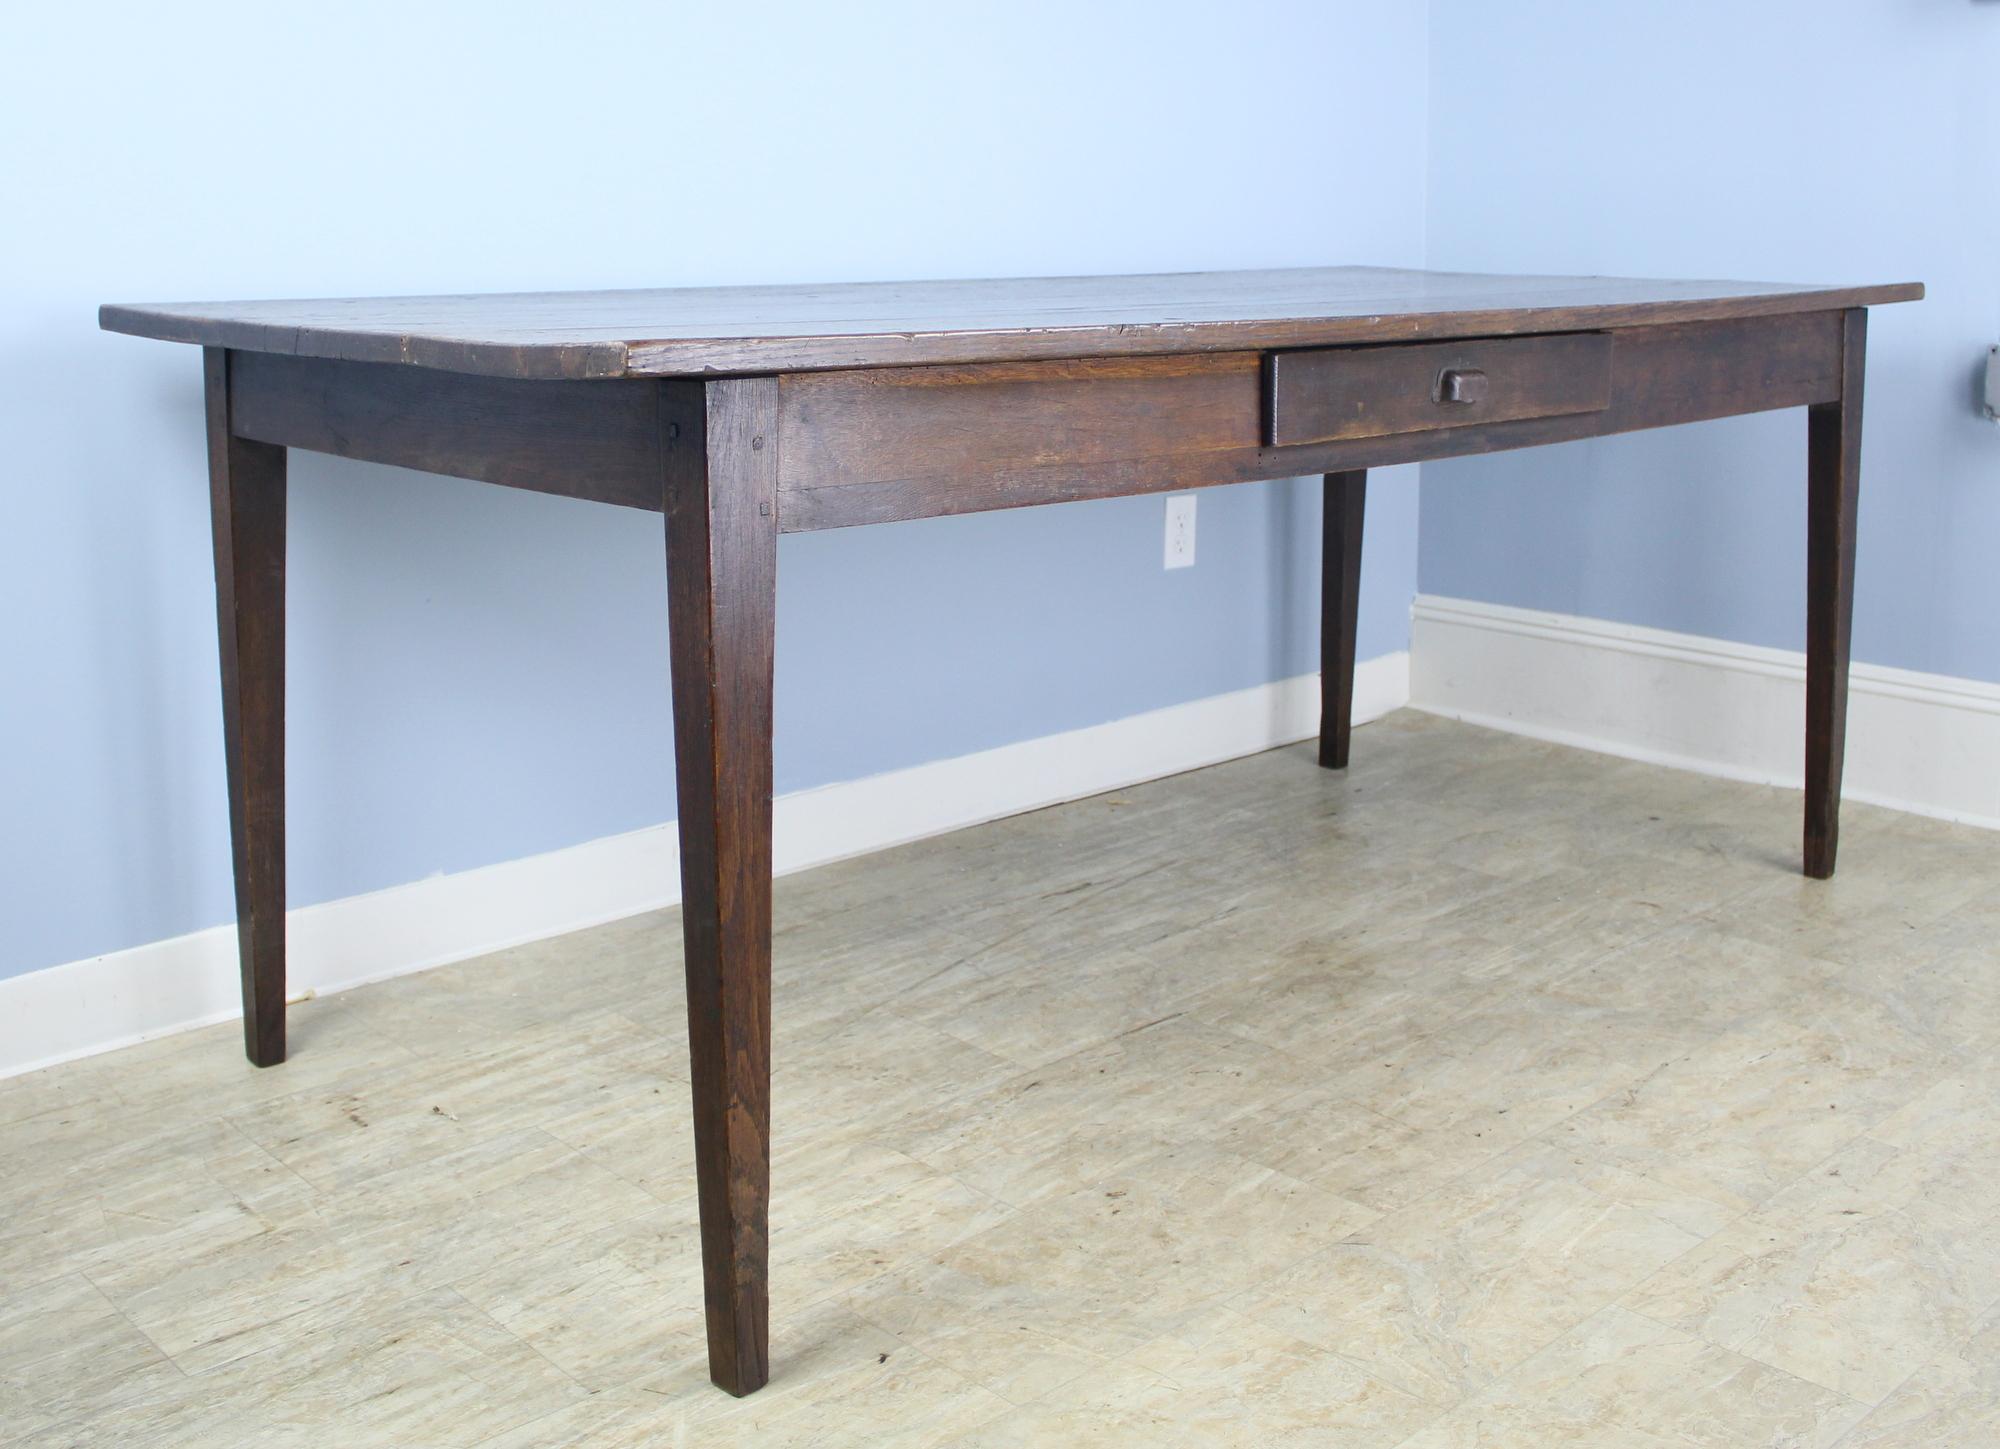 A nicely proportioned oak farm table. Very good grain, color and patina, with one natural knot hole on the top. 26